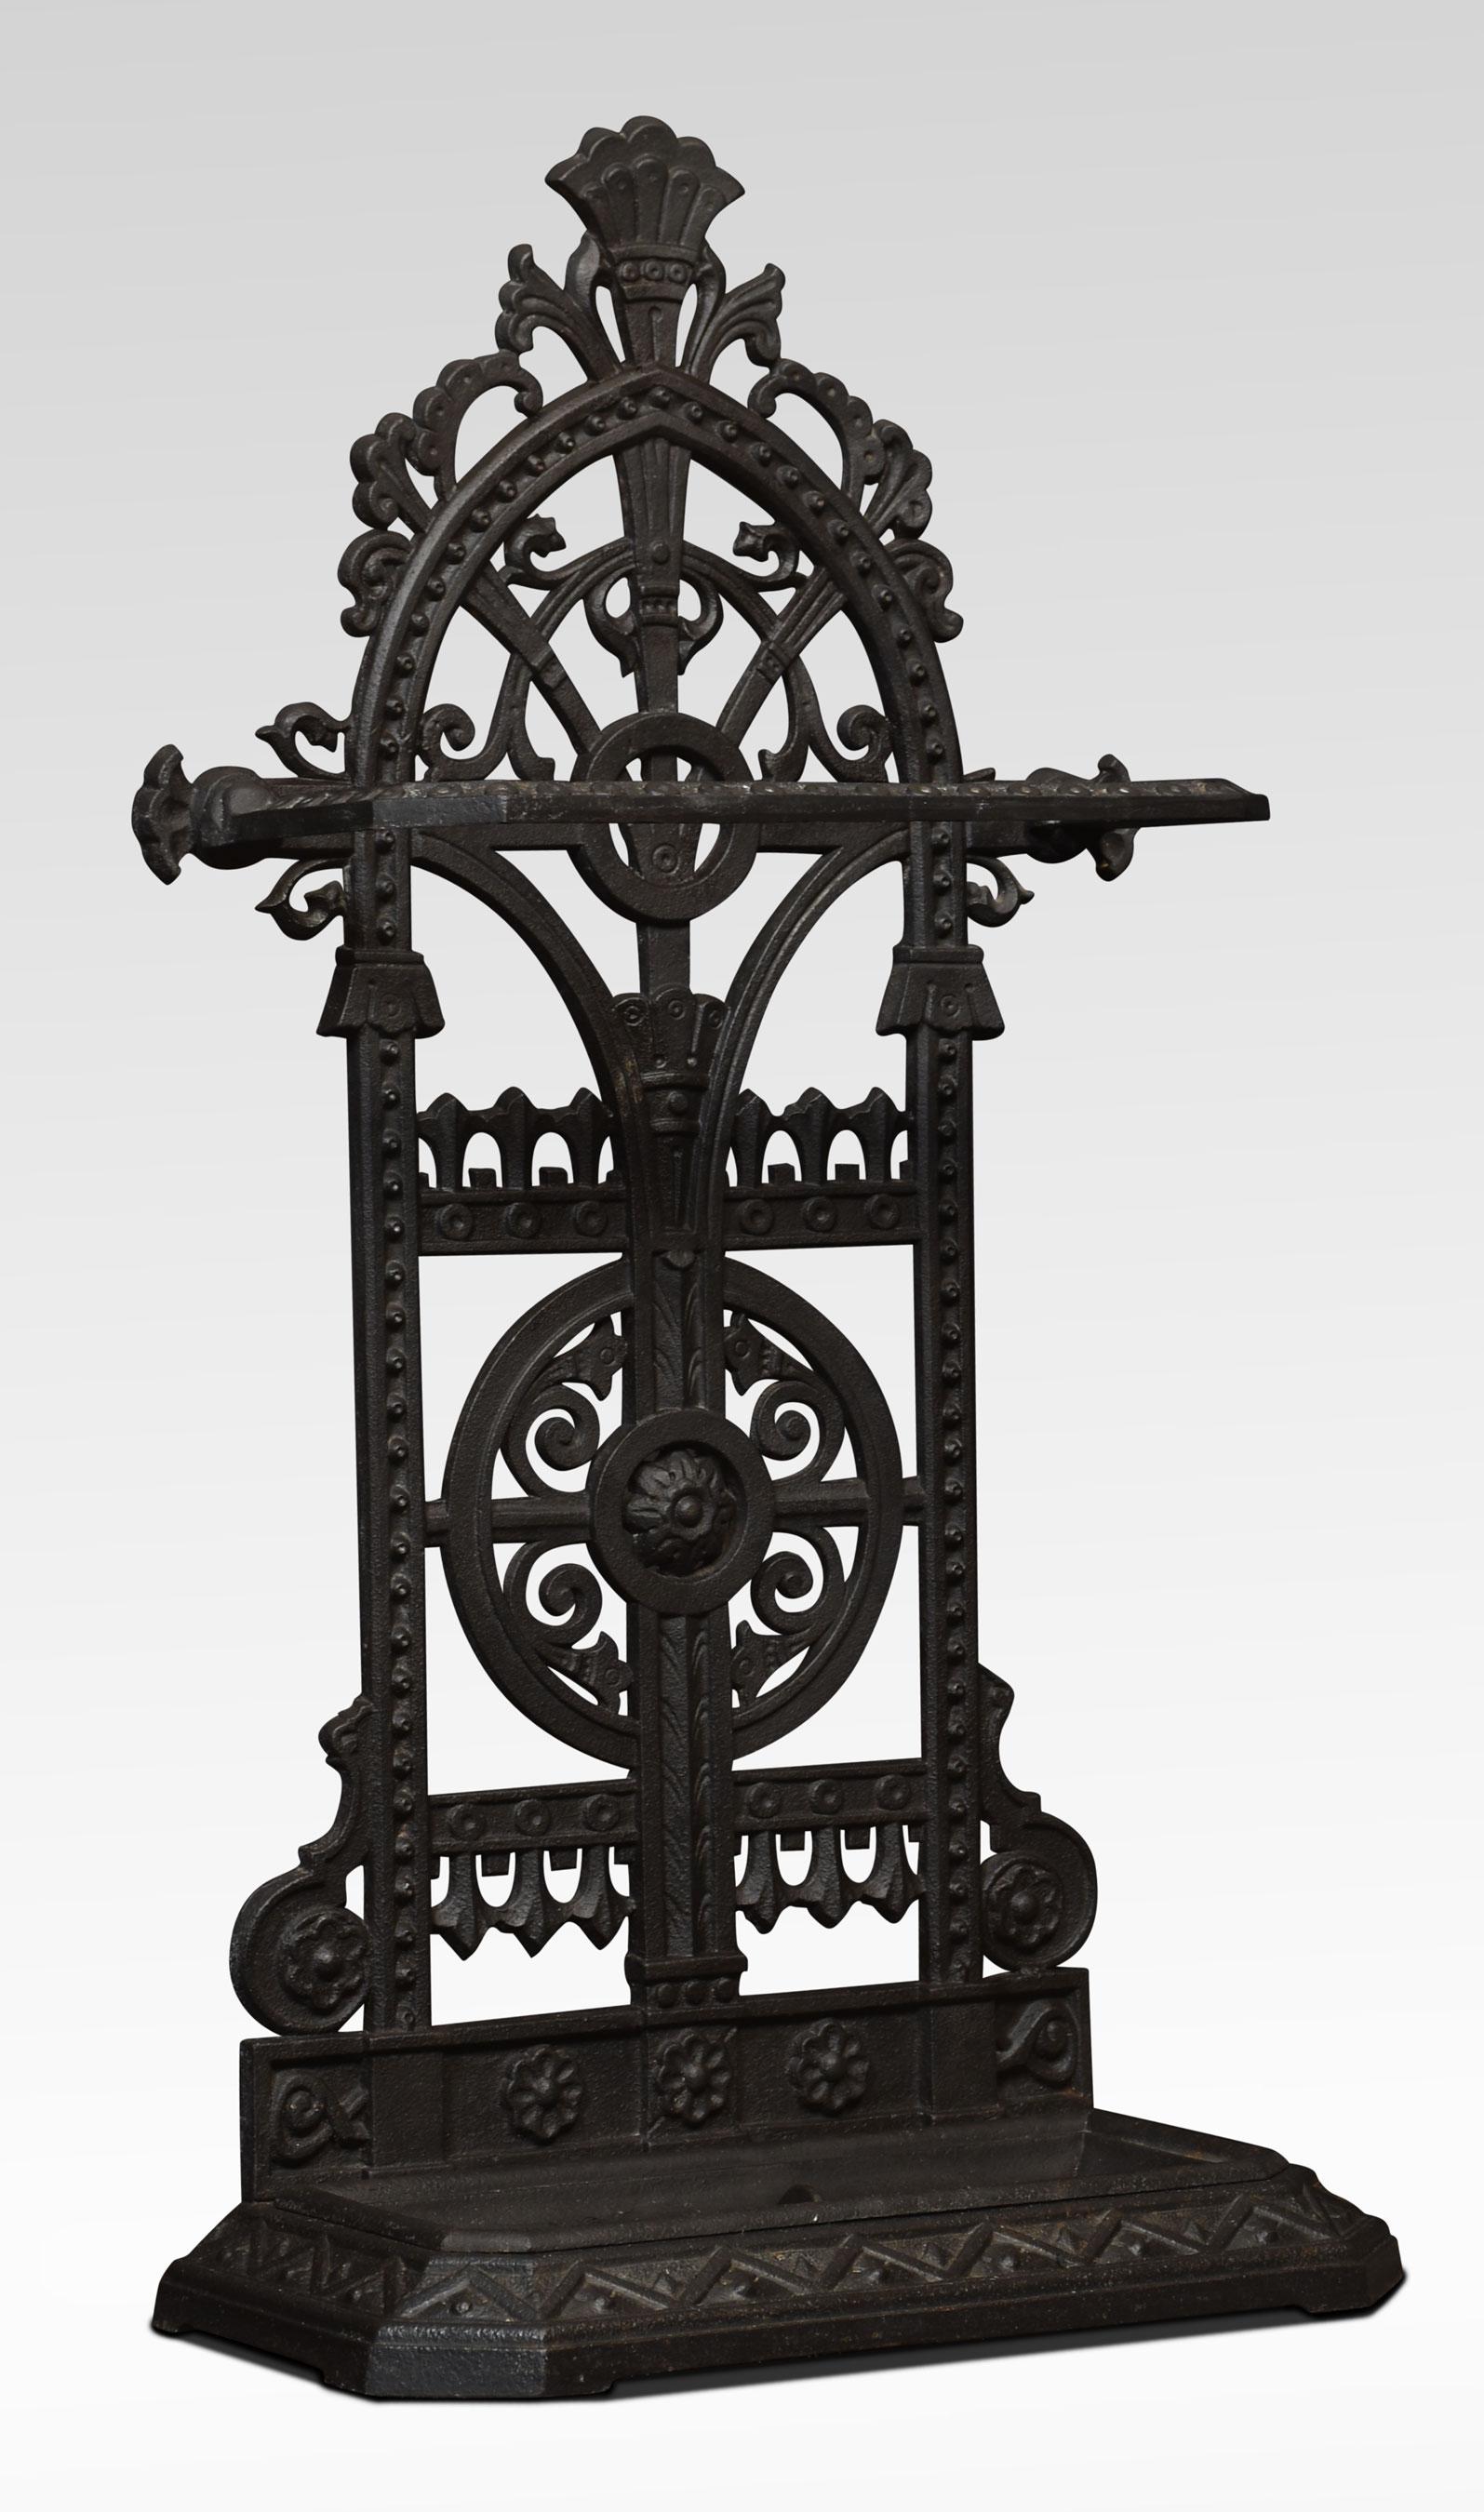 Falkirk cast iron umbrella/stick stand, having a shaped top and pierced back with scrolling decoration. The base with a removable drip tin is all raised up on a plinth base.
Dimensions
Height 32 Inches
Width 17 Inches
Depth 8.5 Inches